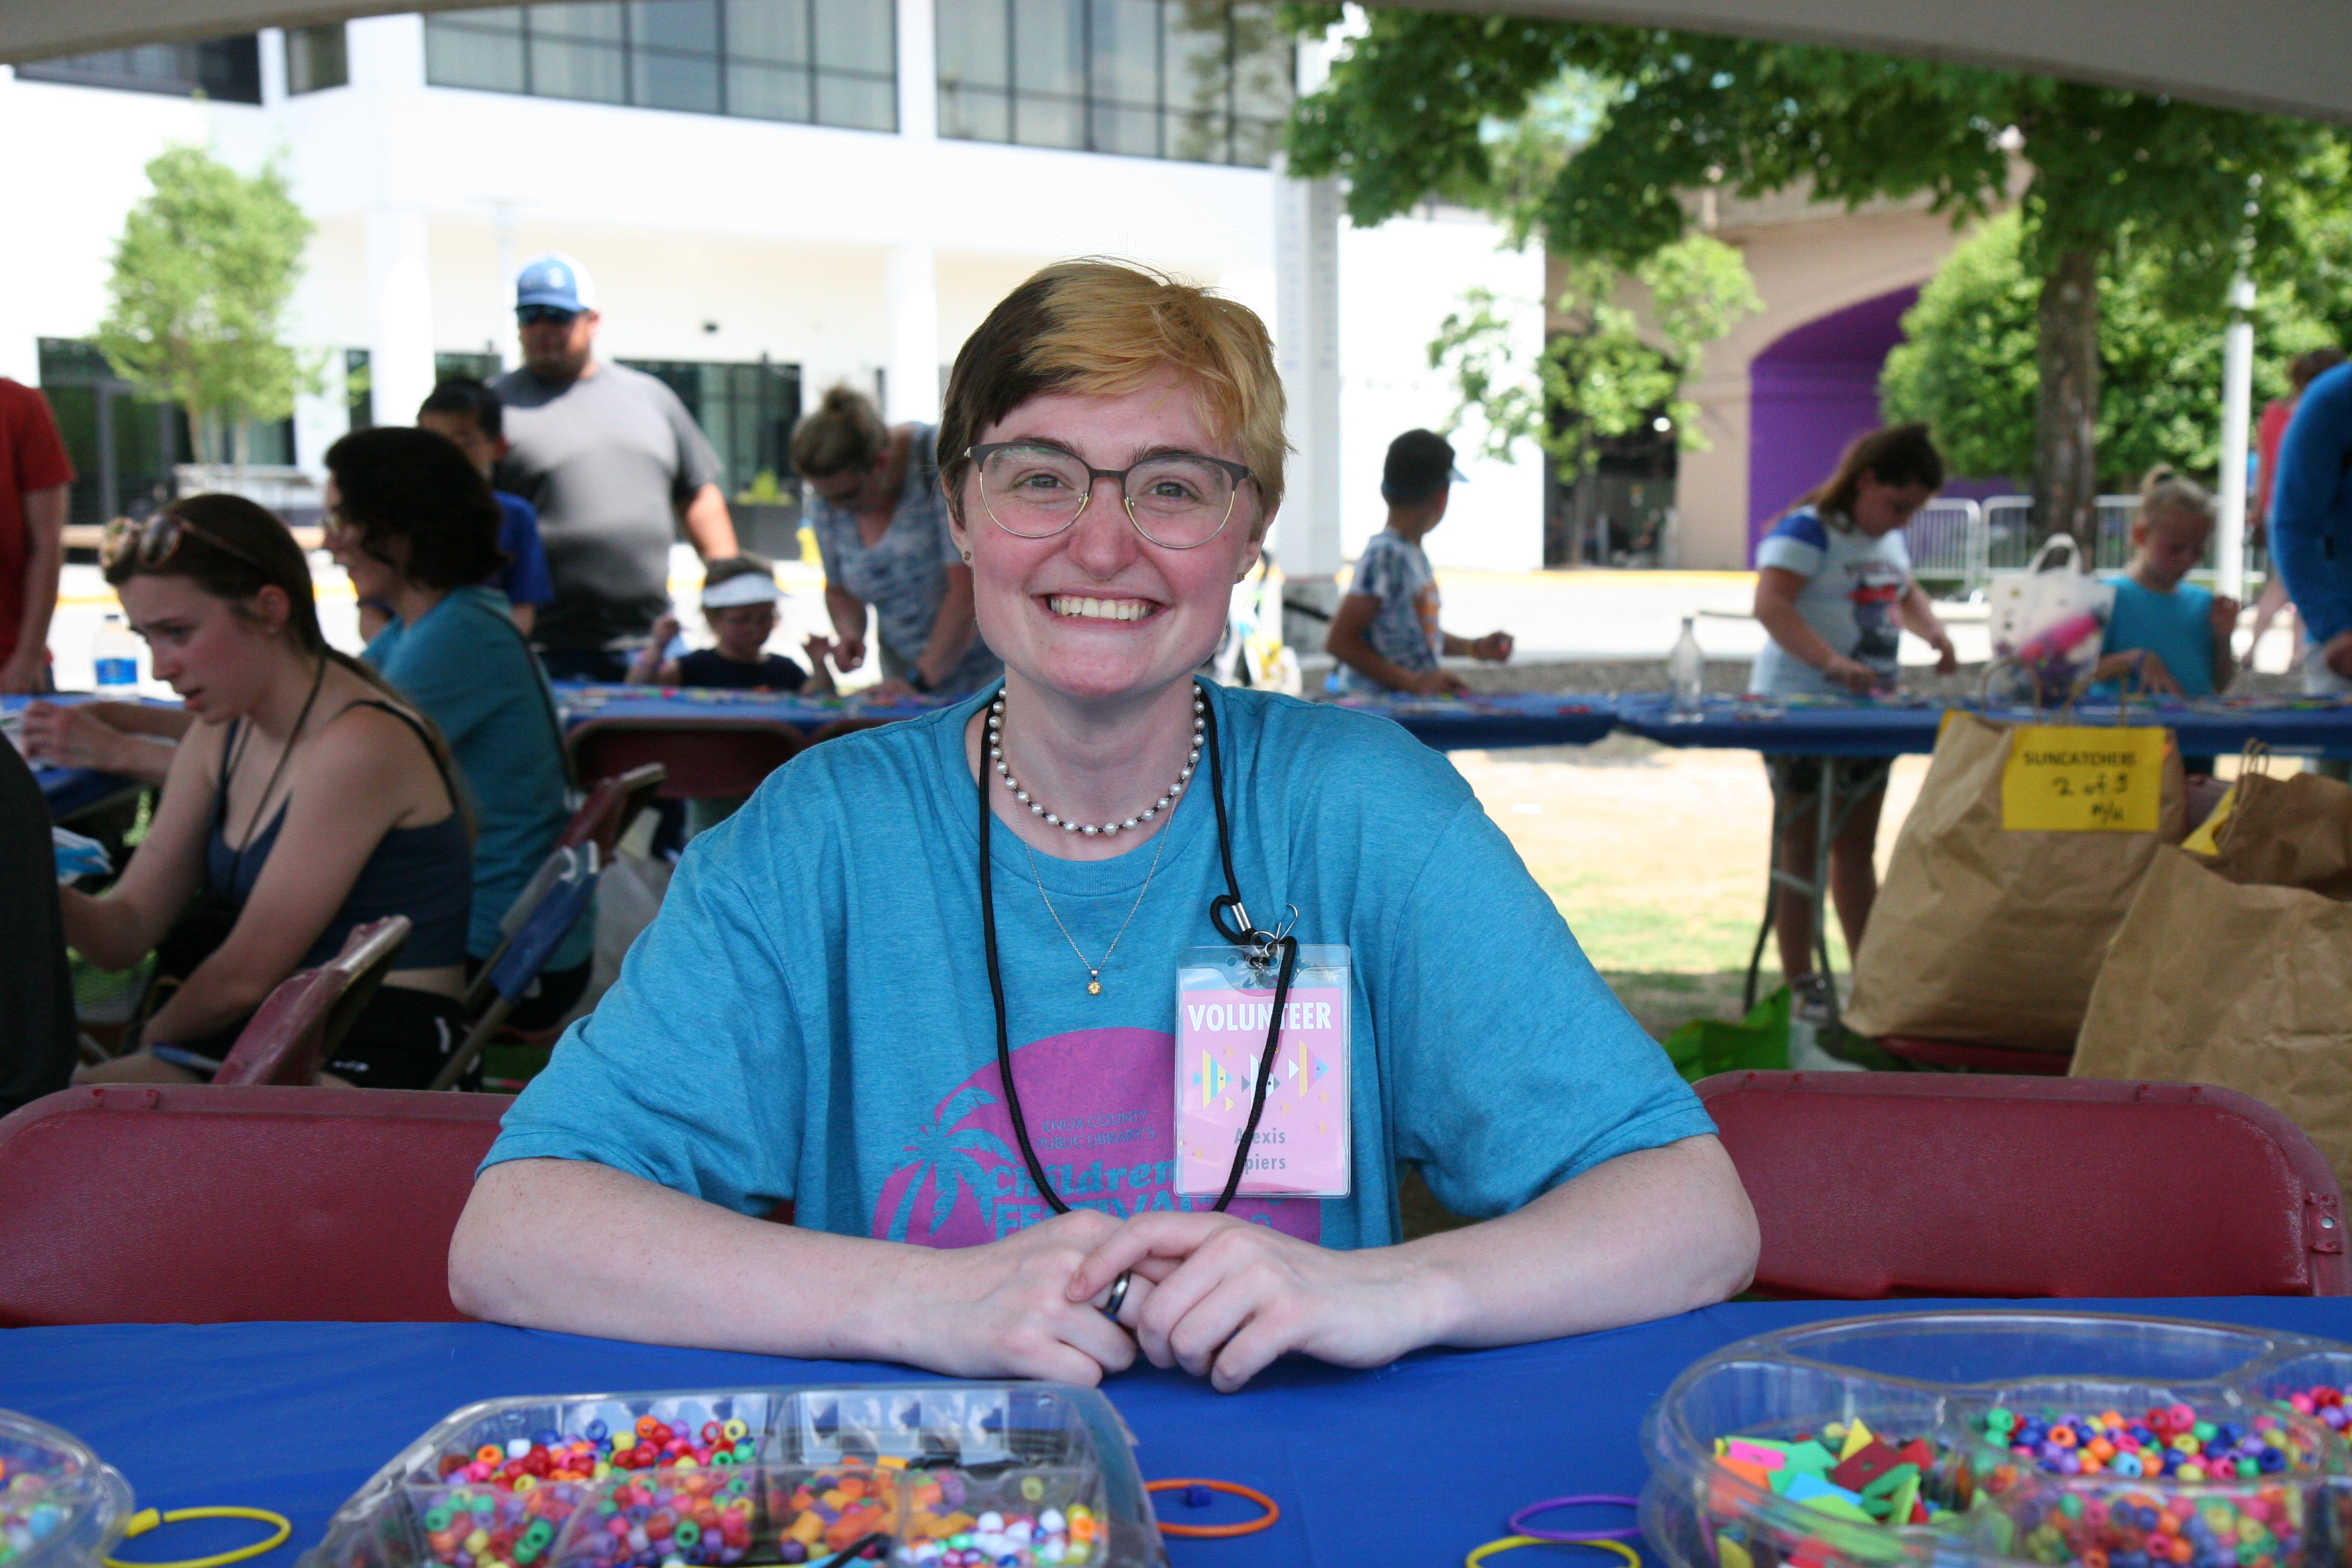 young woman seated at a table outdoors, smiling - festival volunteer